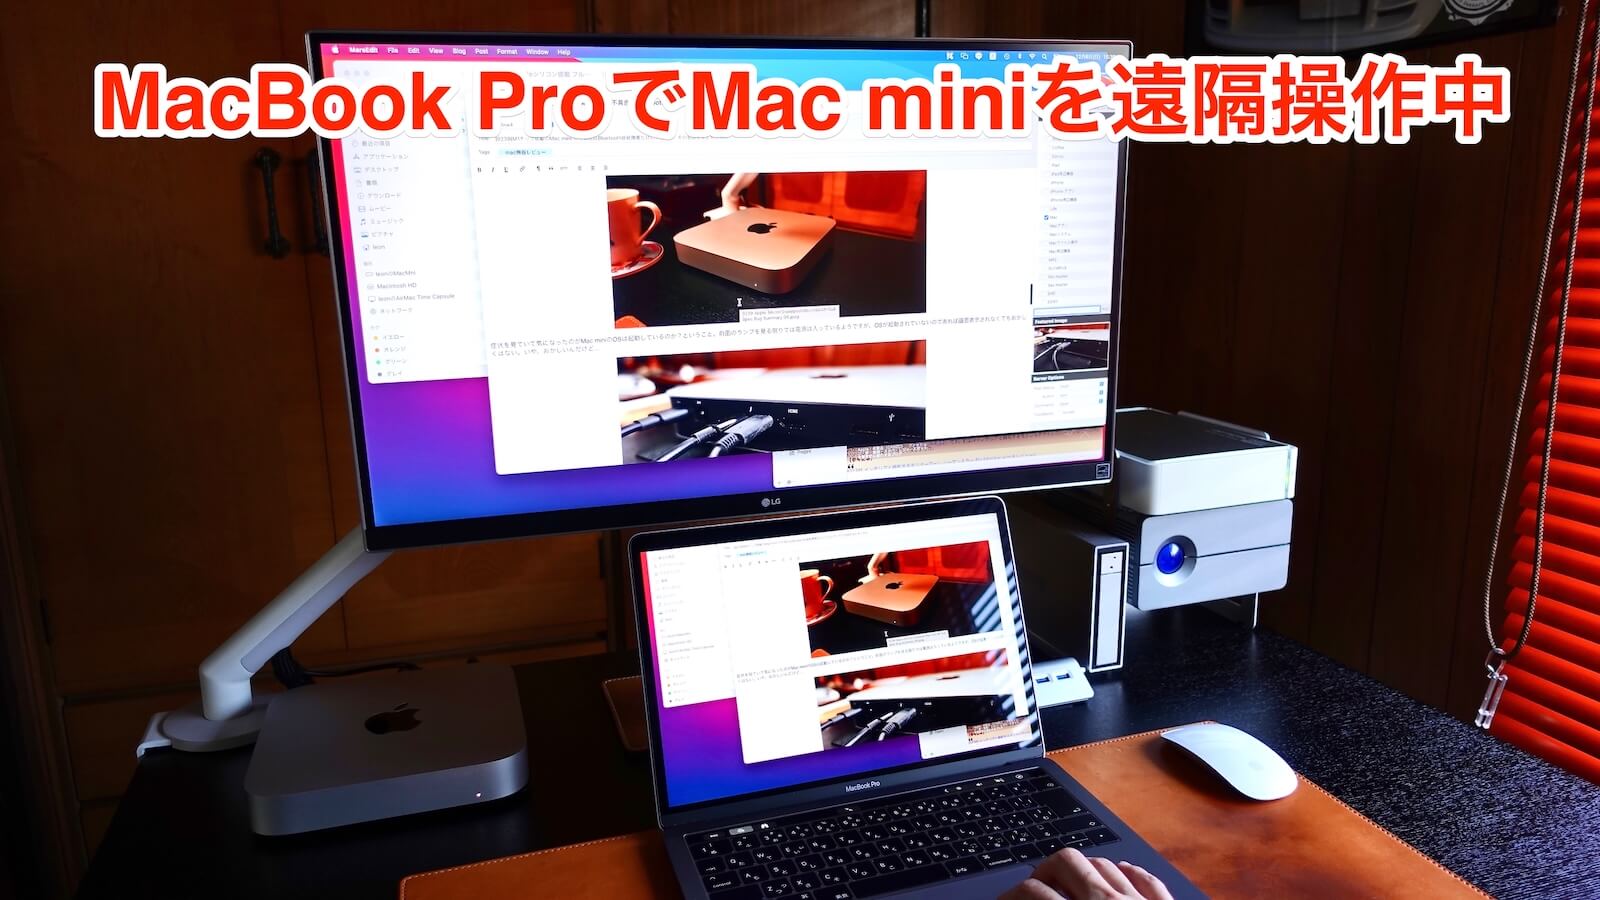 Remotely controlling a Mac mini with a MacBook Pro